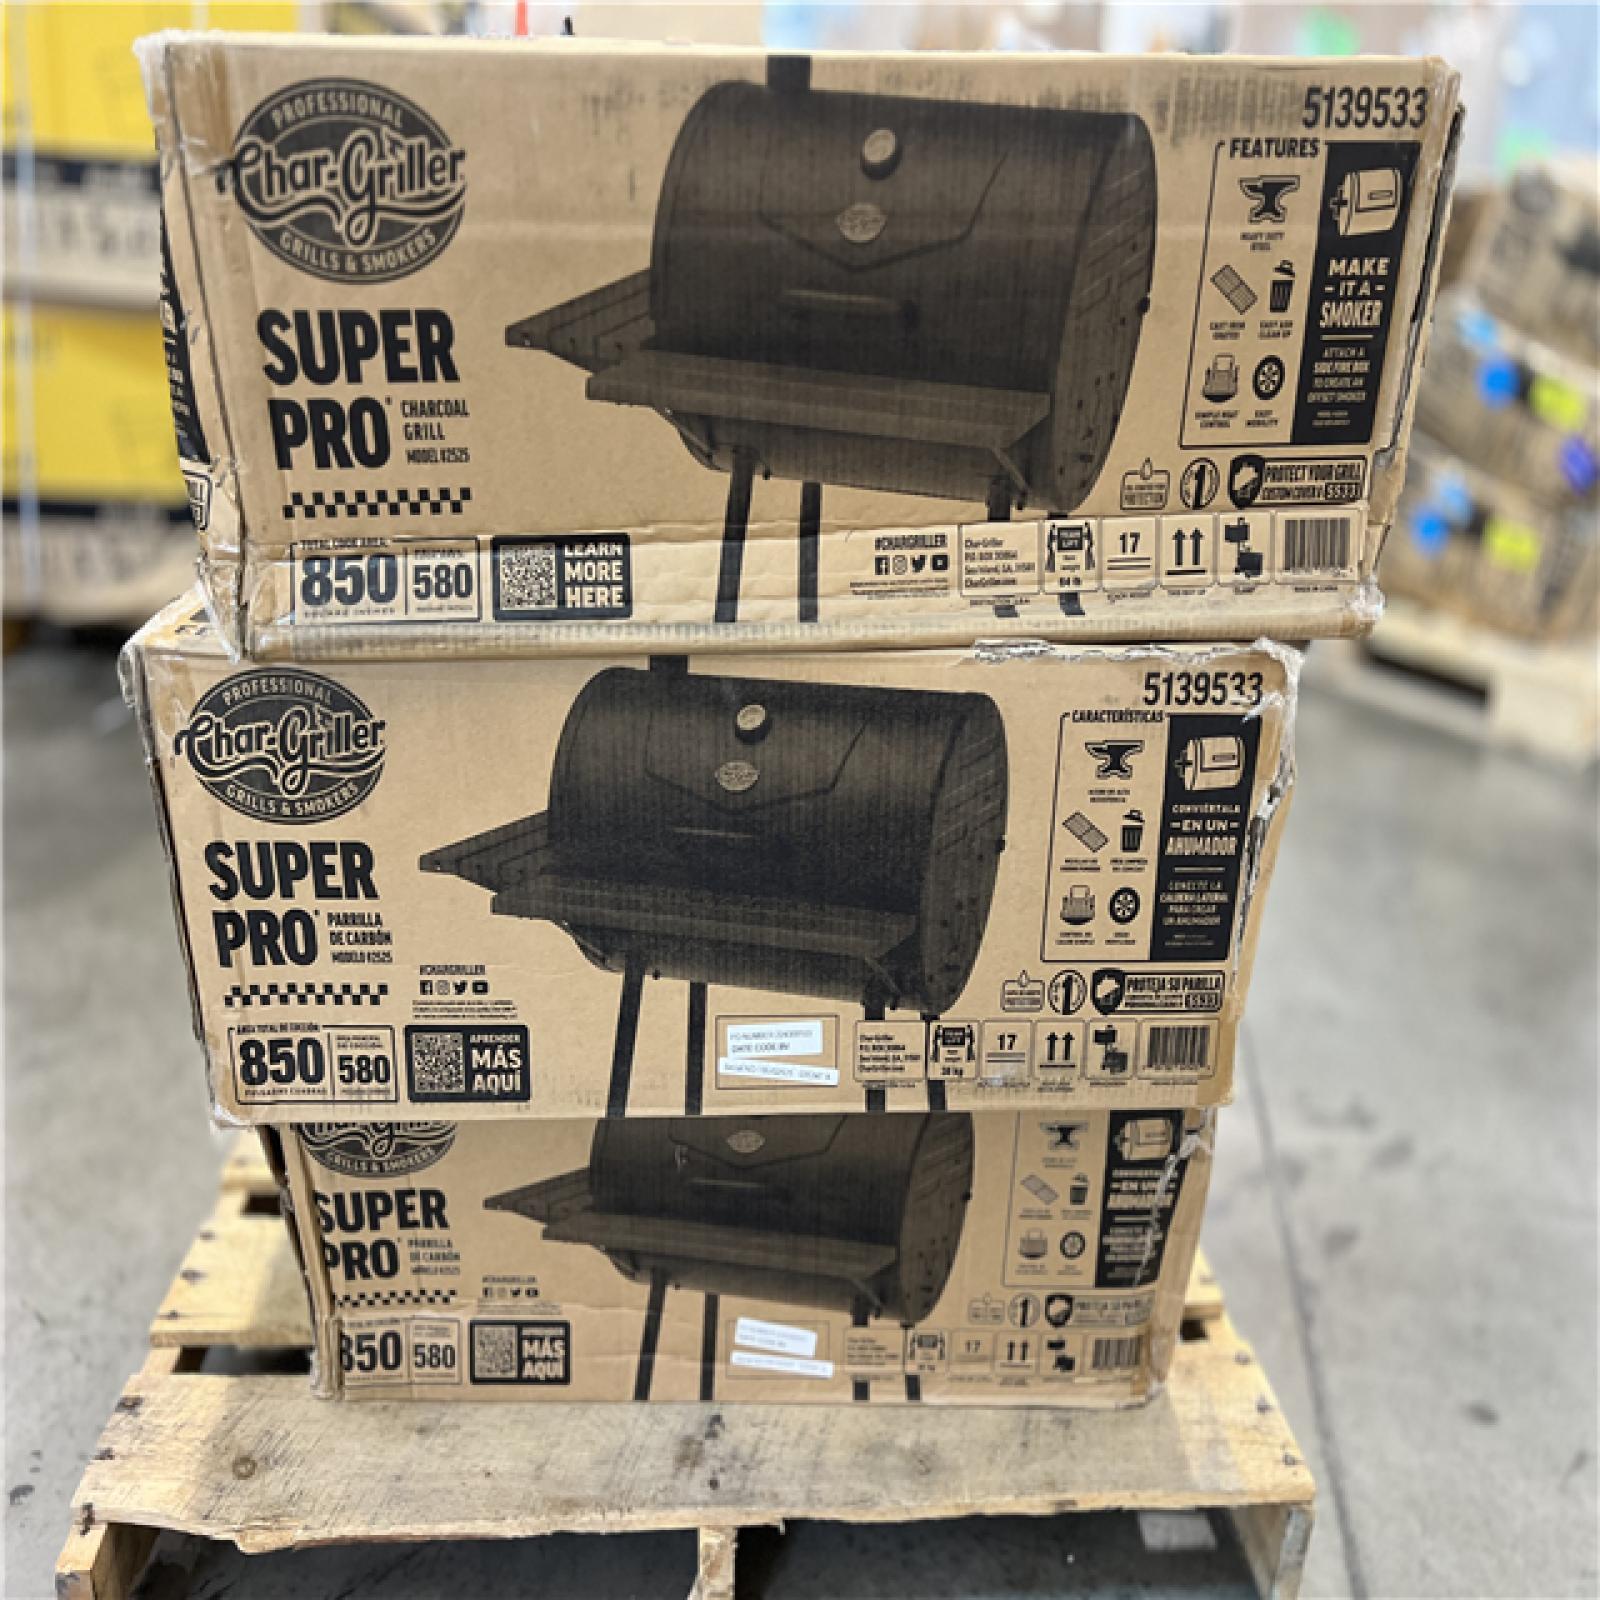 DALLAS LOCATION - Char-Griller Super Pro Charcoal Grill 30-in W Black Barrel Charcoal Grill PALLET - (6 UNITS)